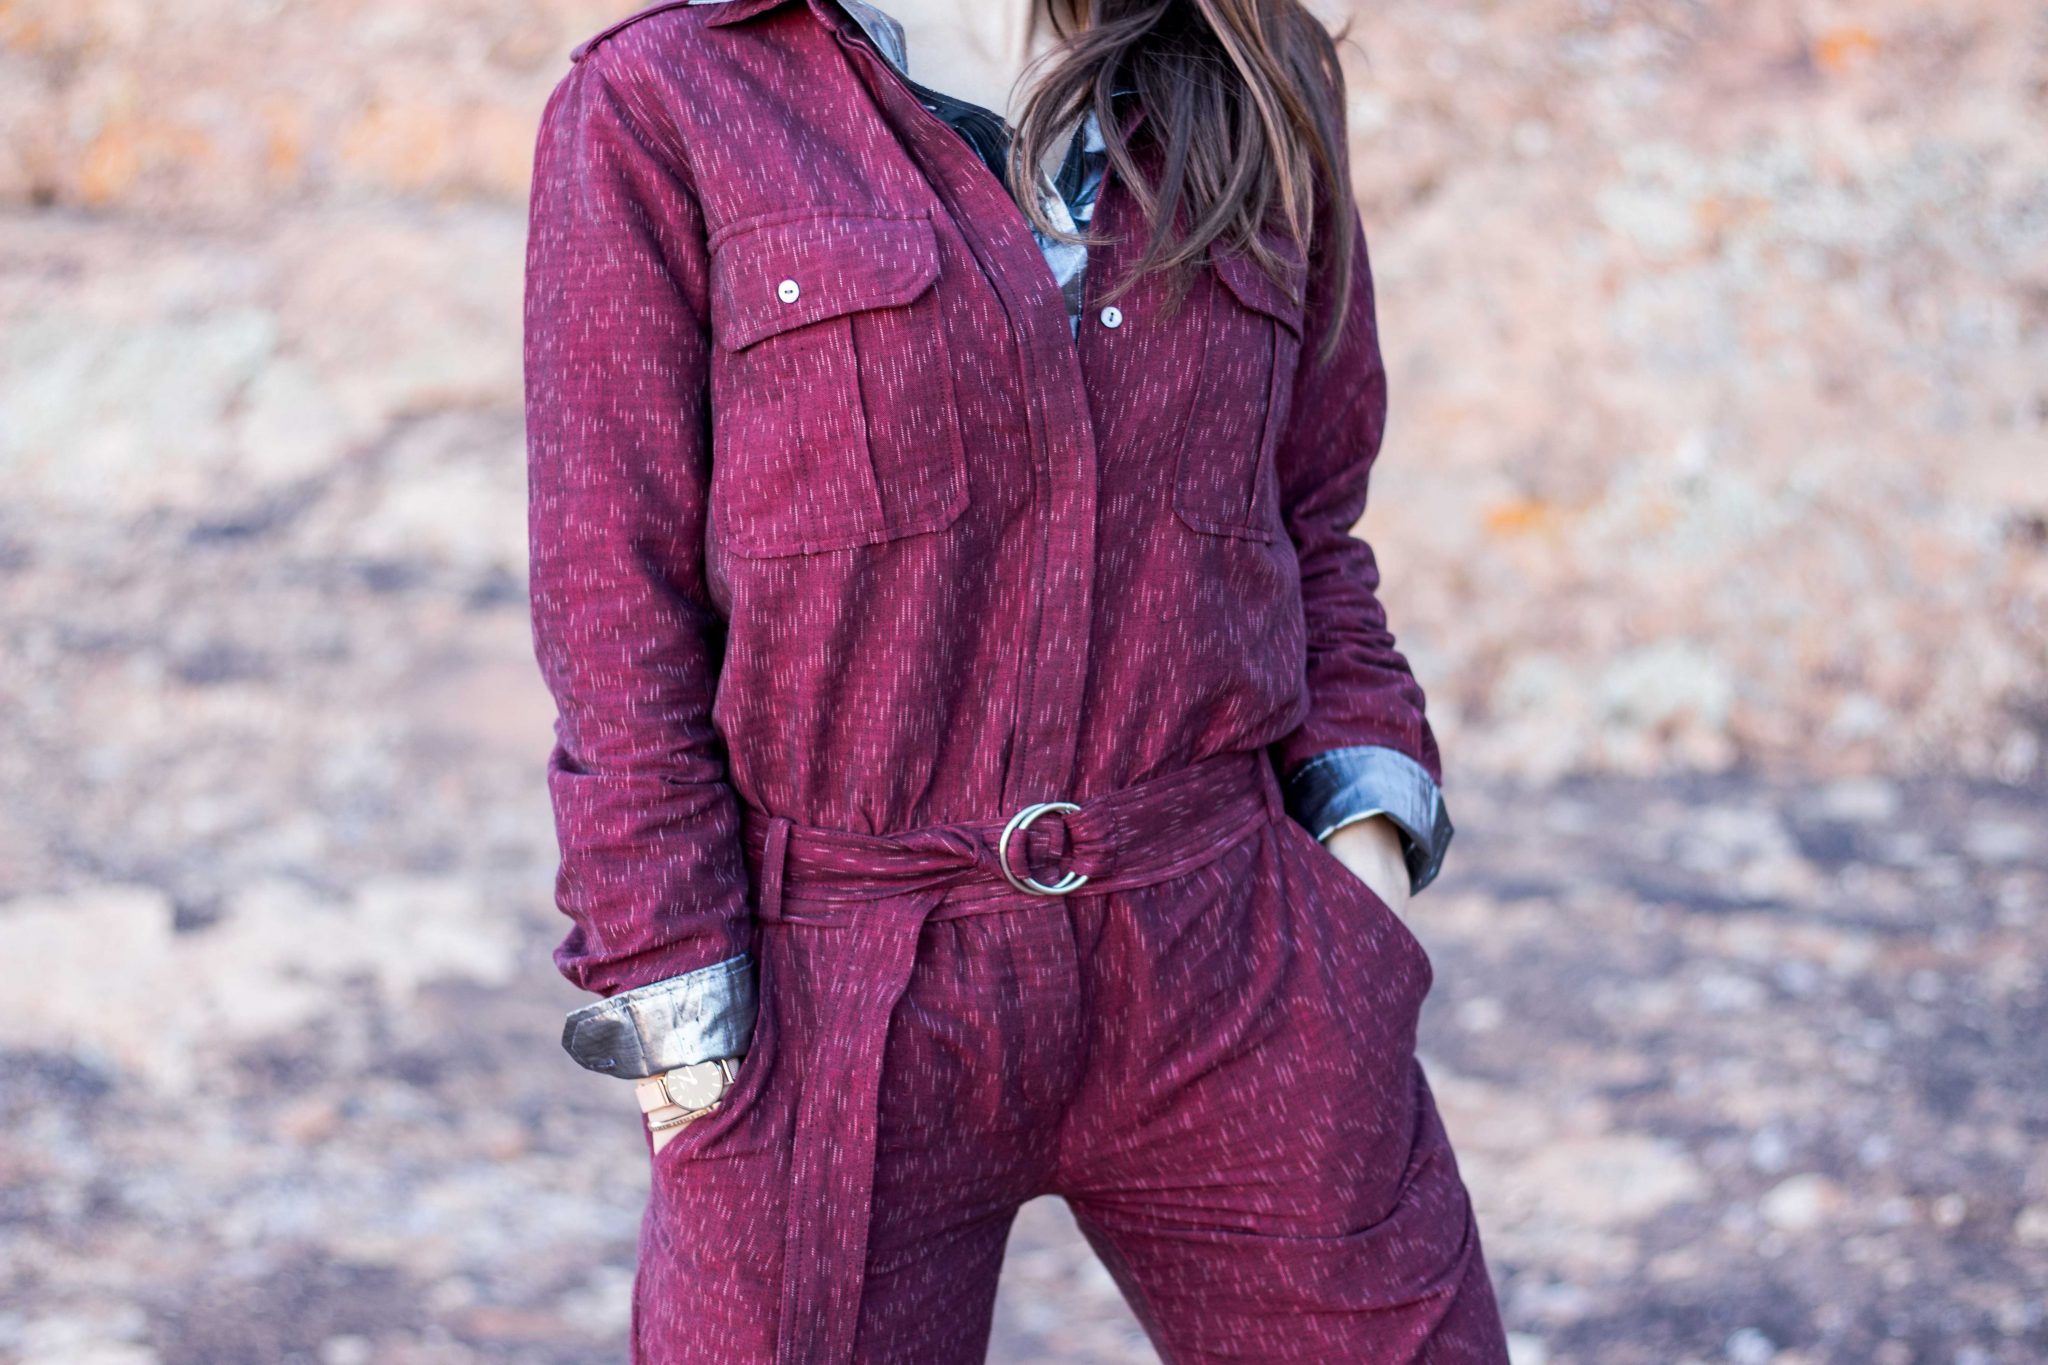 BILLIE JUMPSUIT FABRIC HUNTED AND COLLECTED - ETHICAL FASHION - ARCHES - From Las Vegas to Moab: 5 tips for your road trip: Bryce Canyon, Arches National Park, Canyonlands national park